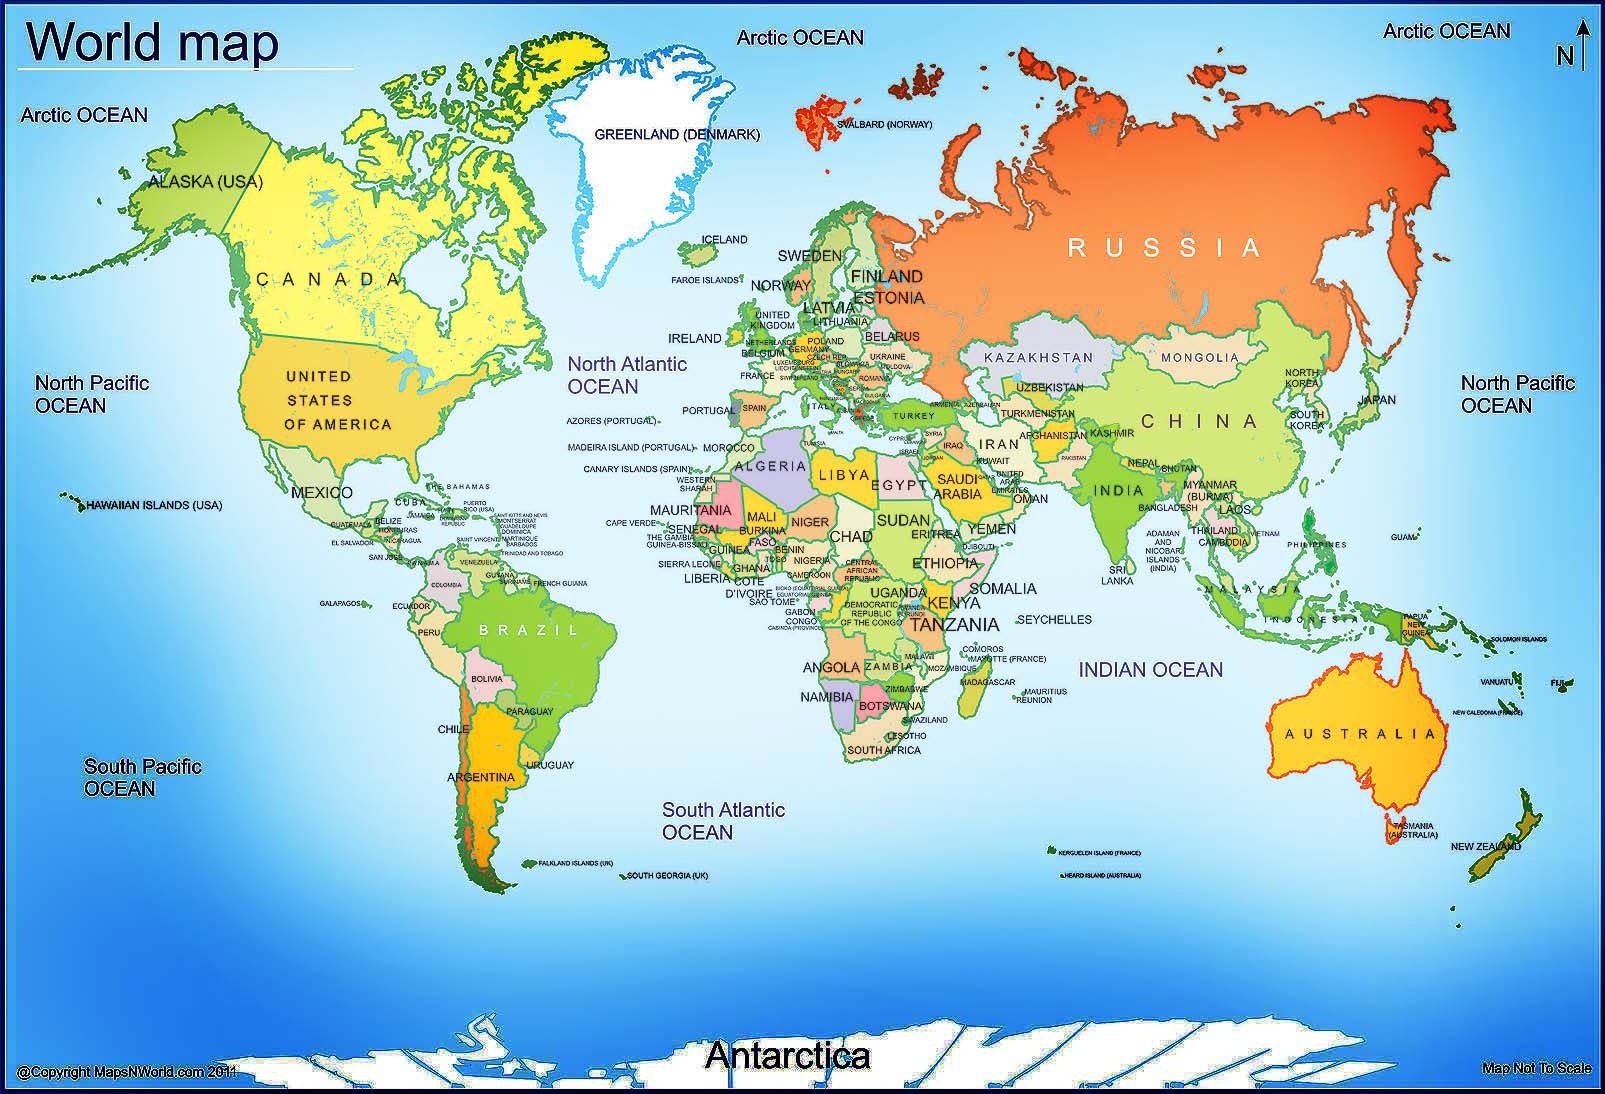 World Map - Free Large Images | Maps | World Map With Countries - Free Printable World Map Images